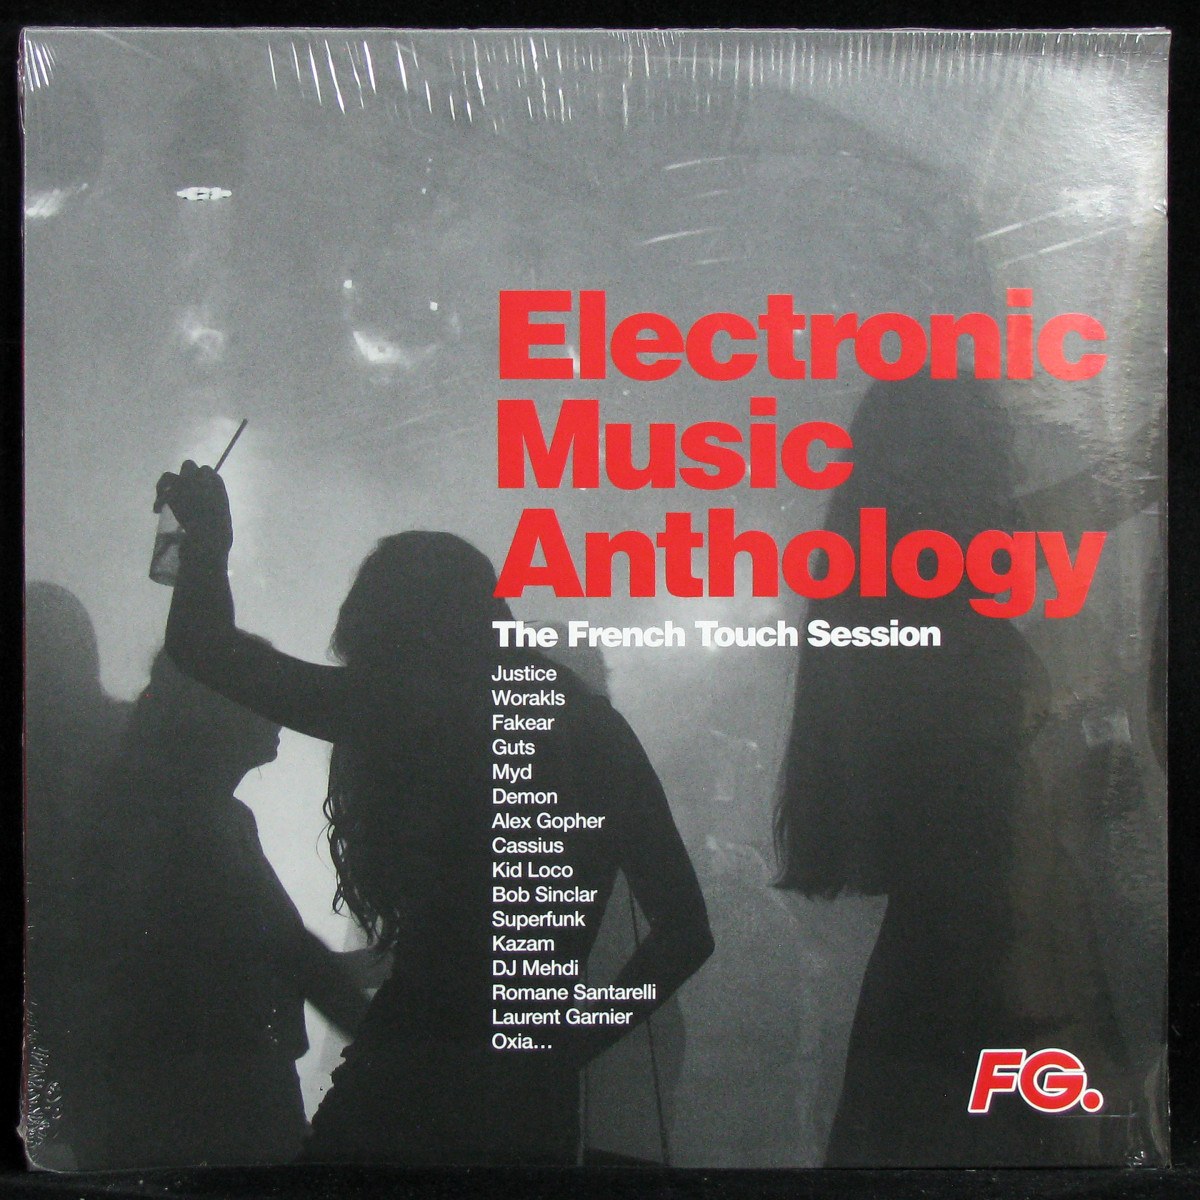 LP V/A — Electronic Music Anthology by FG - The French Touch Session (2LP) фото